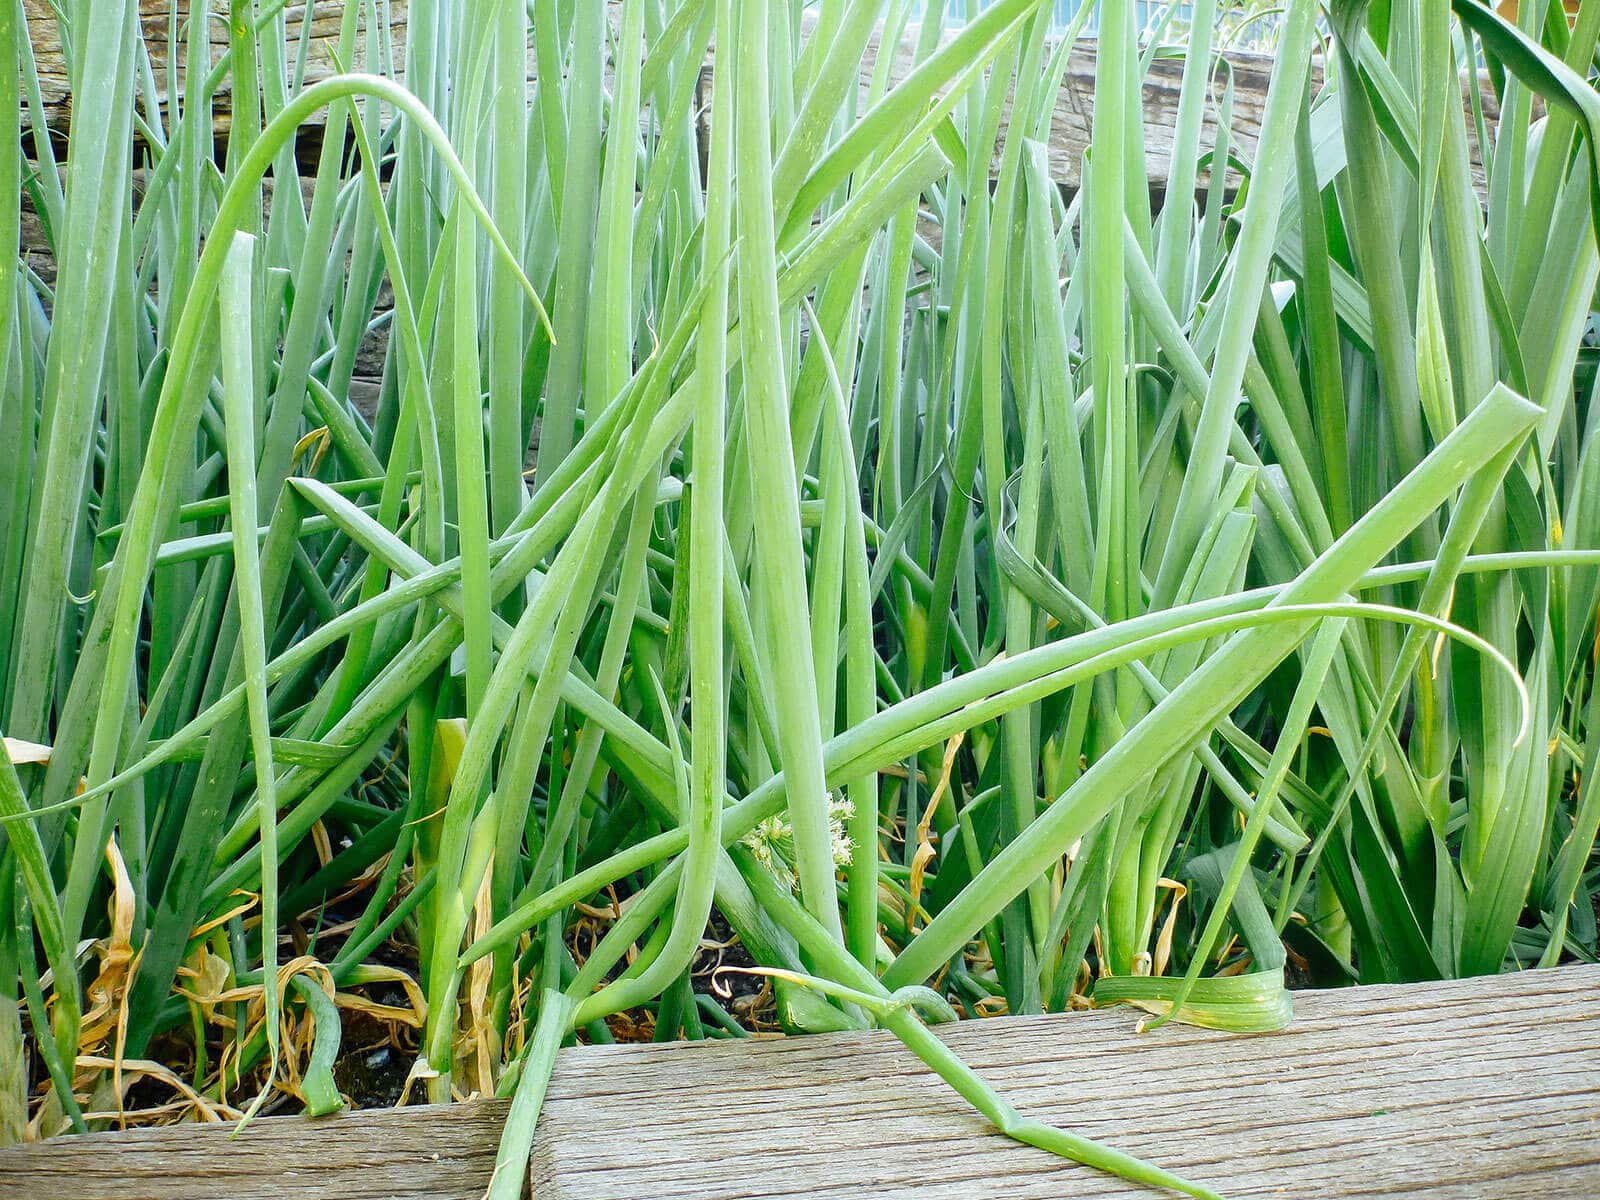 Lush green onion leaves in summer